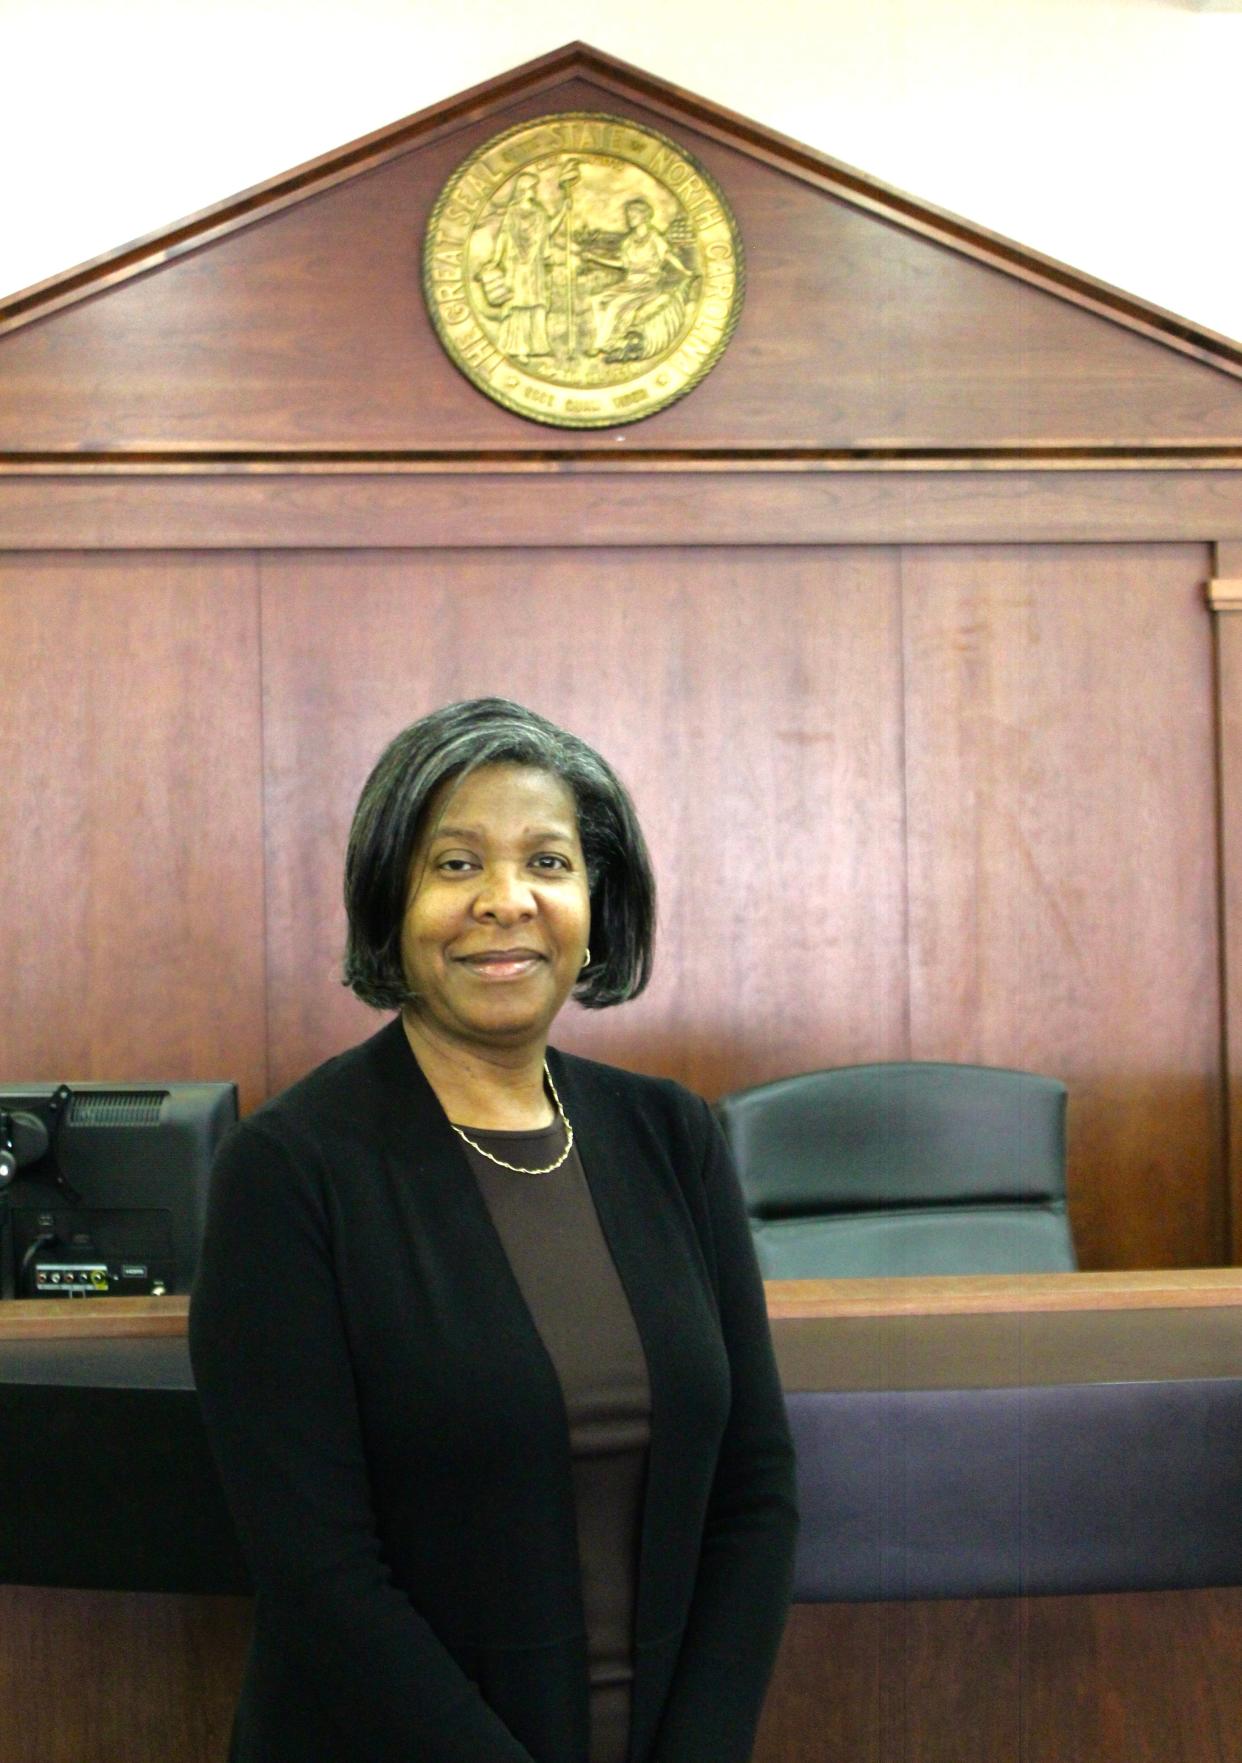 Phyllis Gorham, Superior Court Judge for the Fifth Judicial District, is retiring after 18 years on the bench.